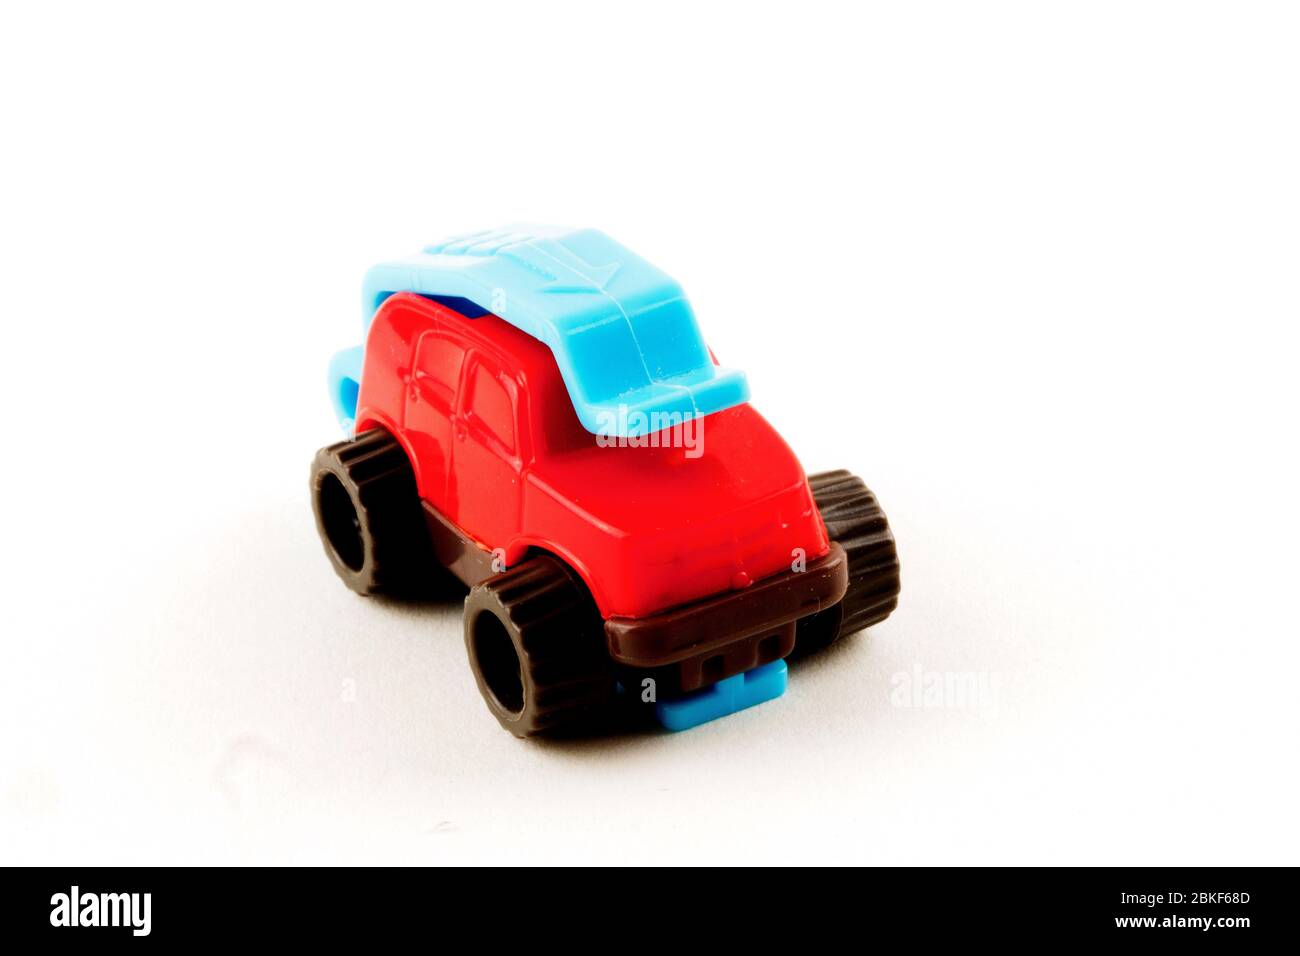 Matchbox Plastic truck toy isolated in white background Stock Photo